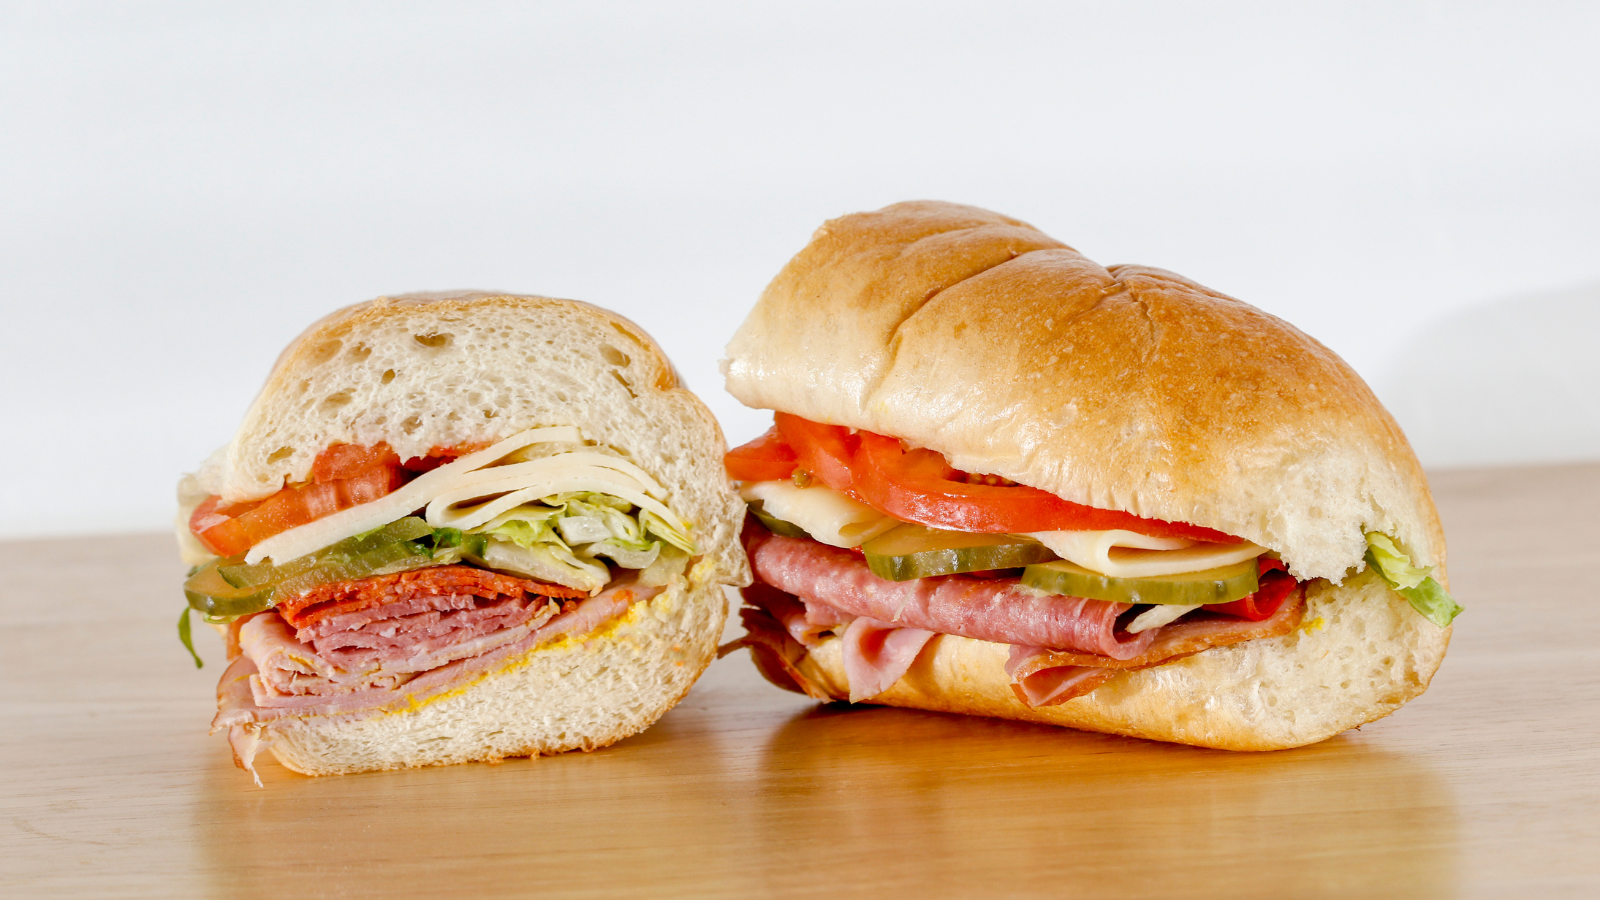 7 Best Sub Franchises in the USA